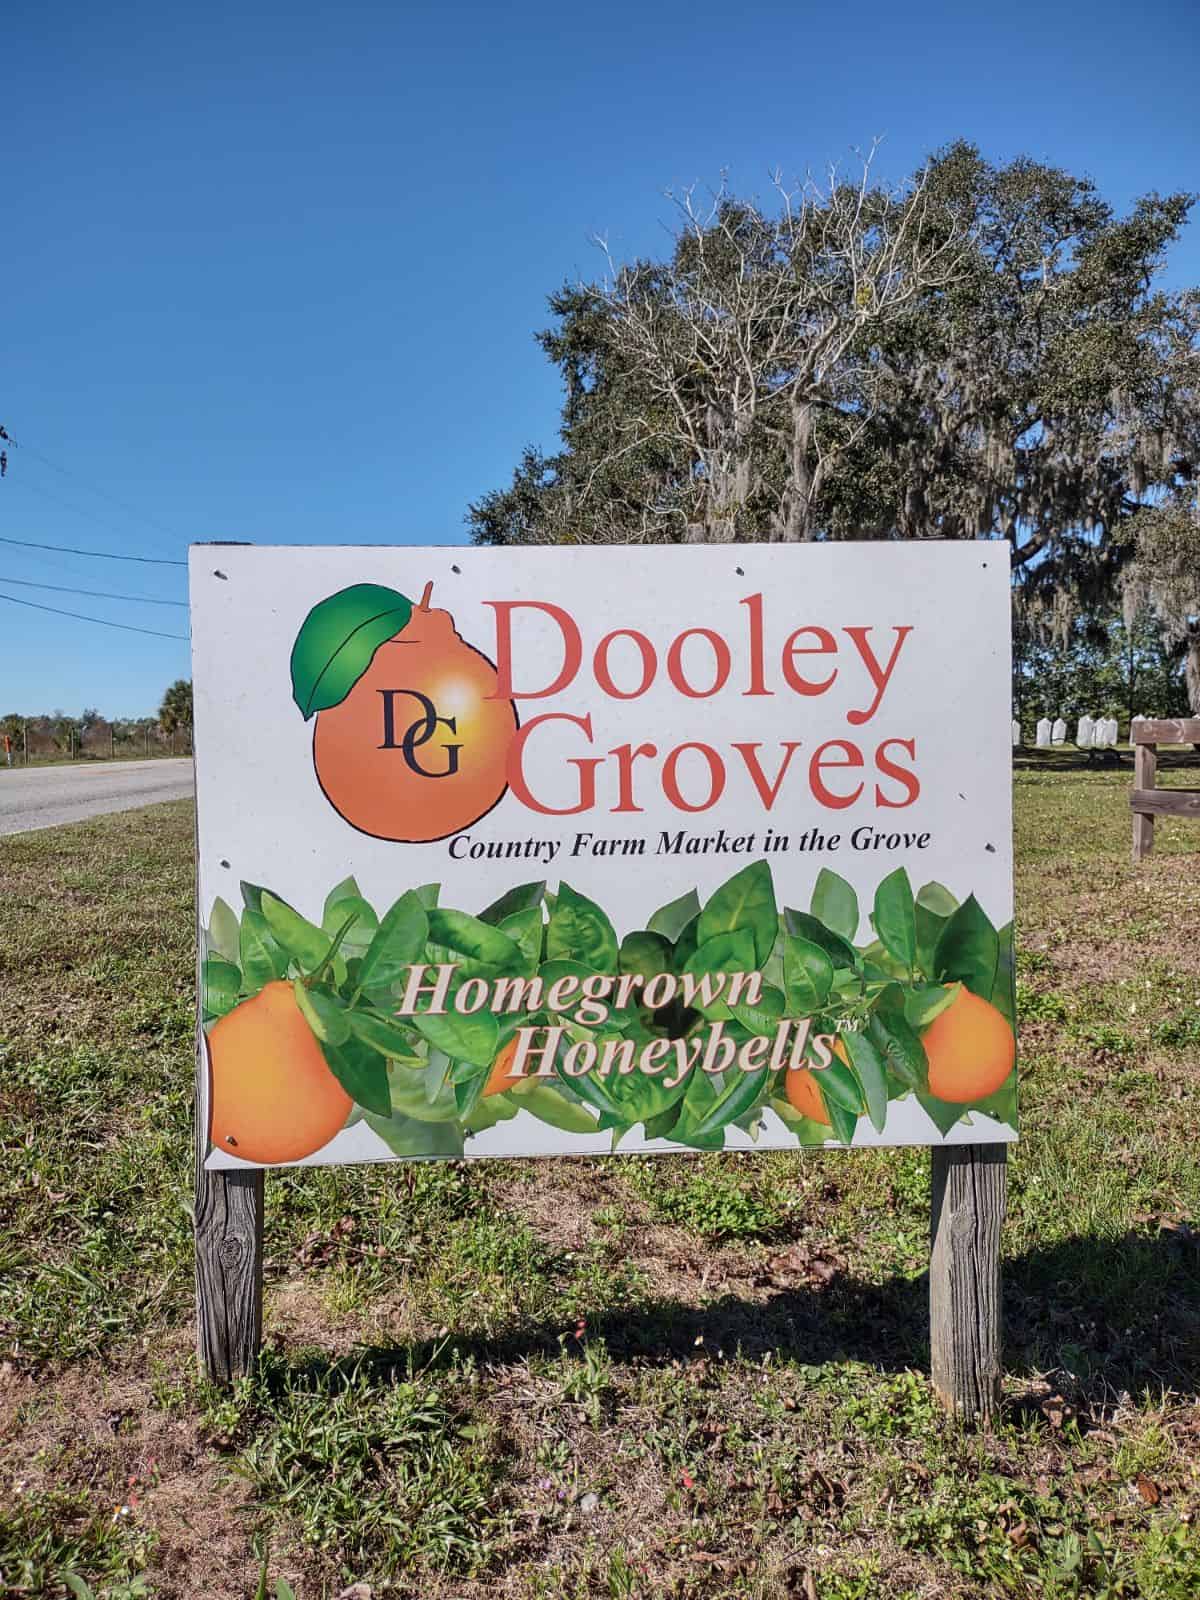 A white sign says that says Dooley Groves "Country Farm Market in the Grove" Homegrown Honeybells 